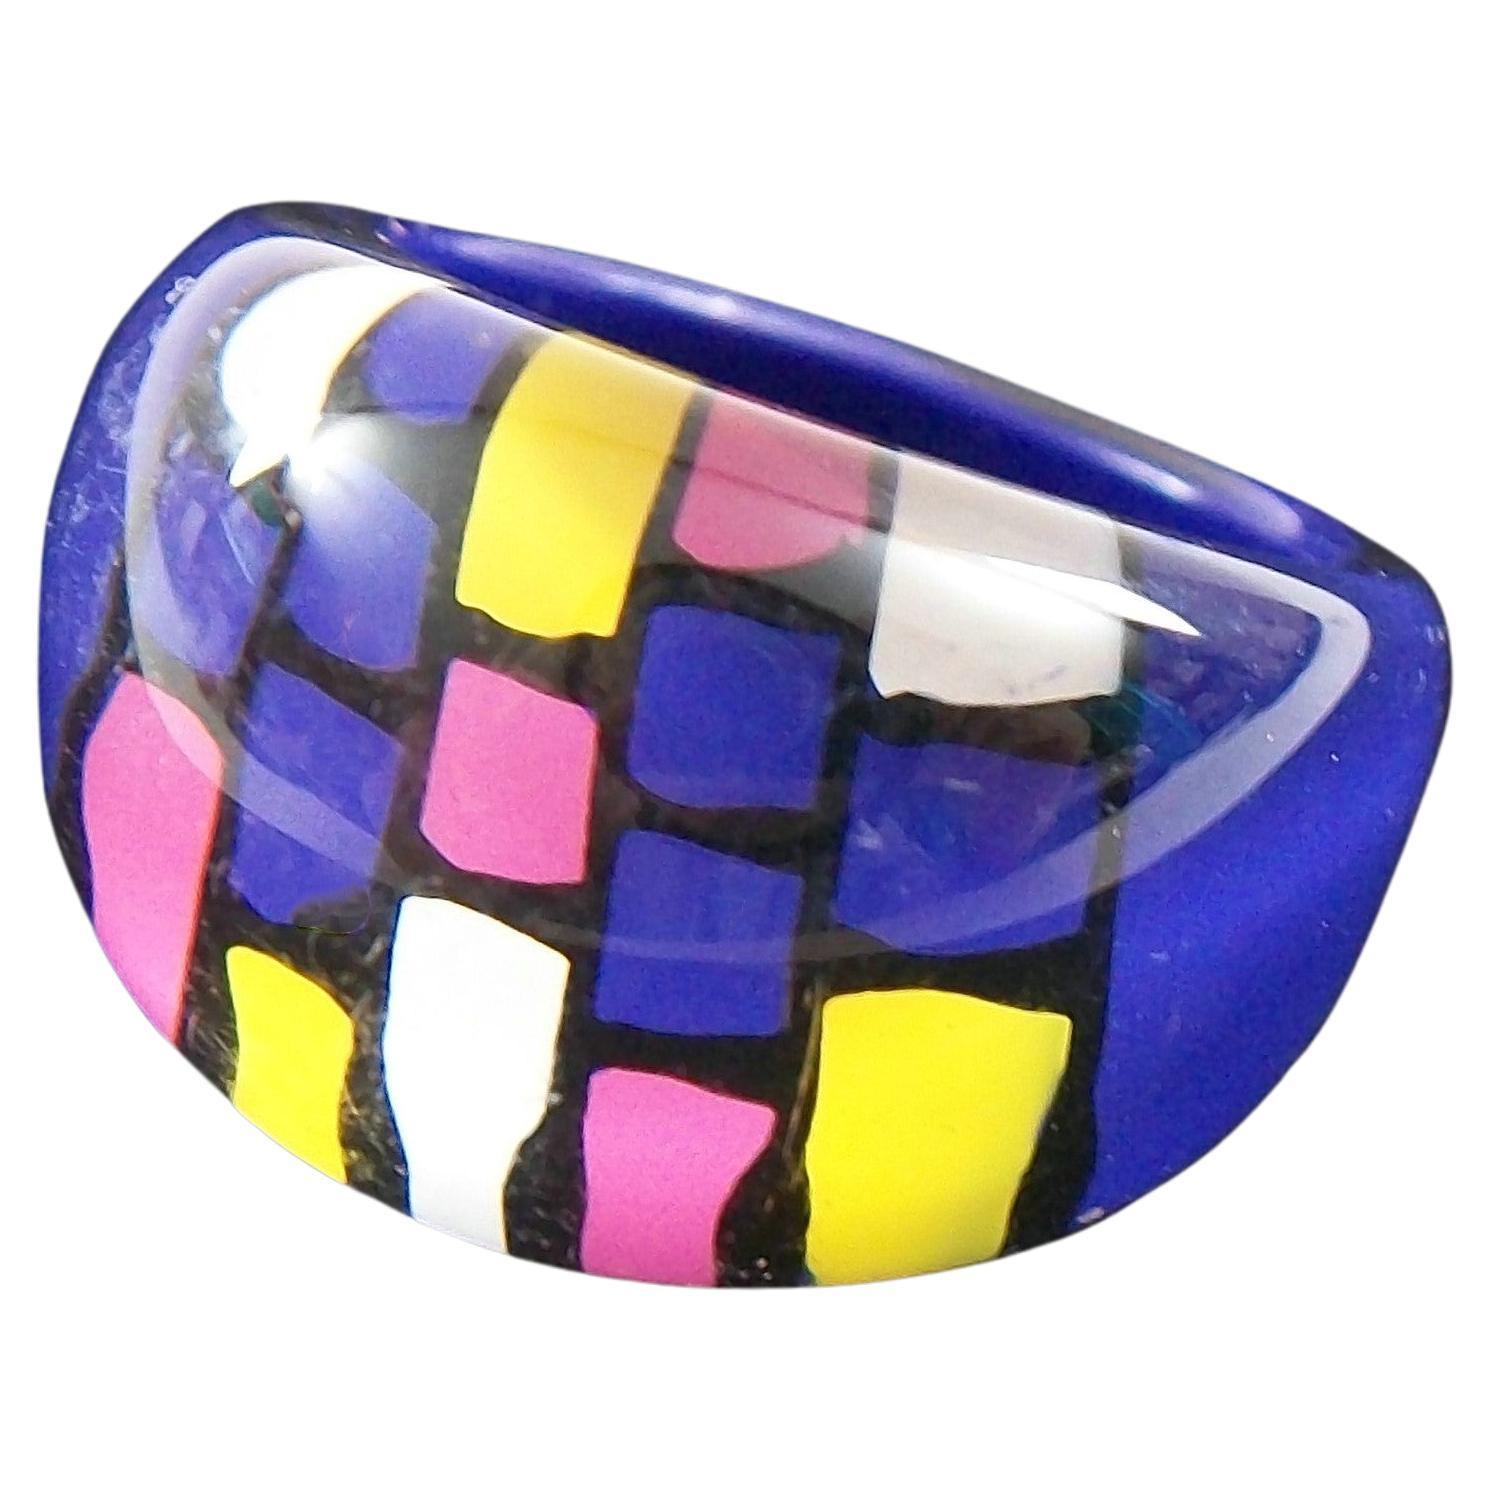 Vintage Pop Art Back Painted Lucite Ring - Size 7 3/4 - Unsigned - Late 20th C. For Sale